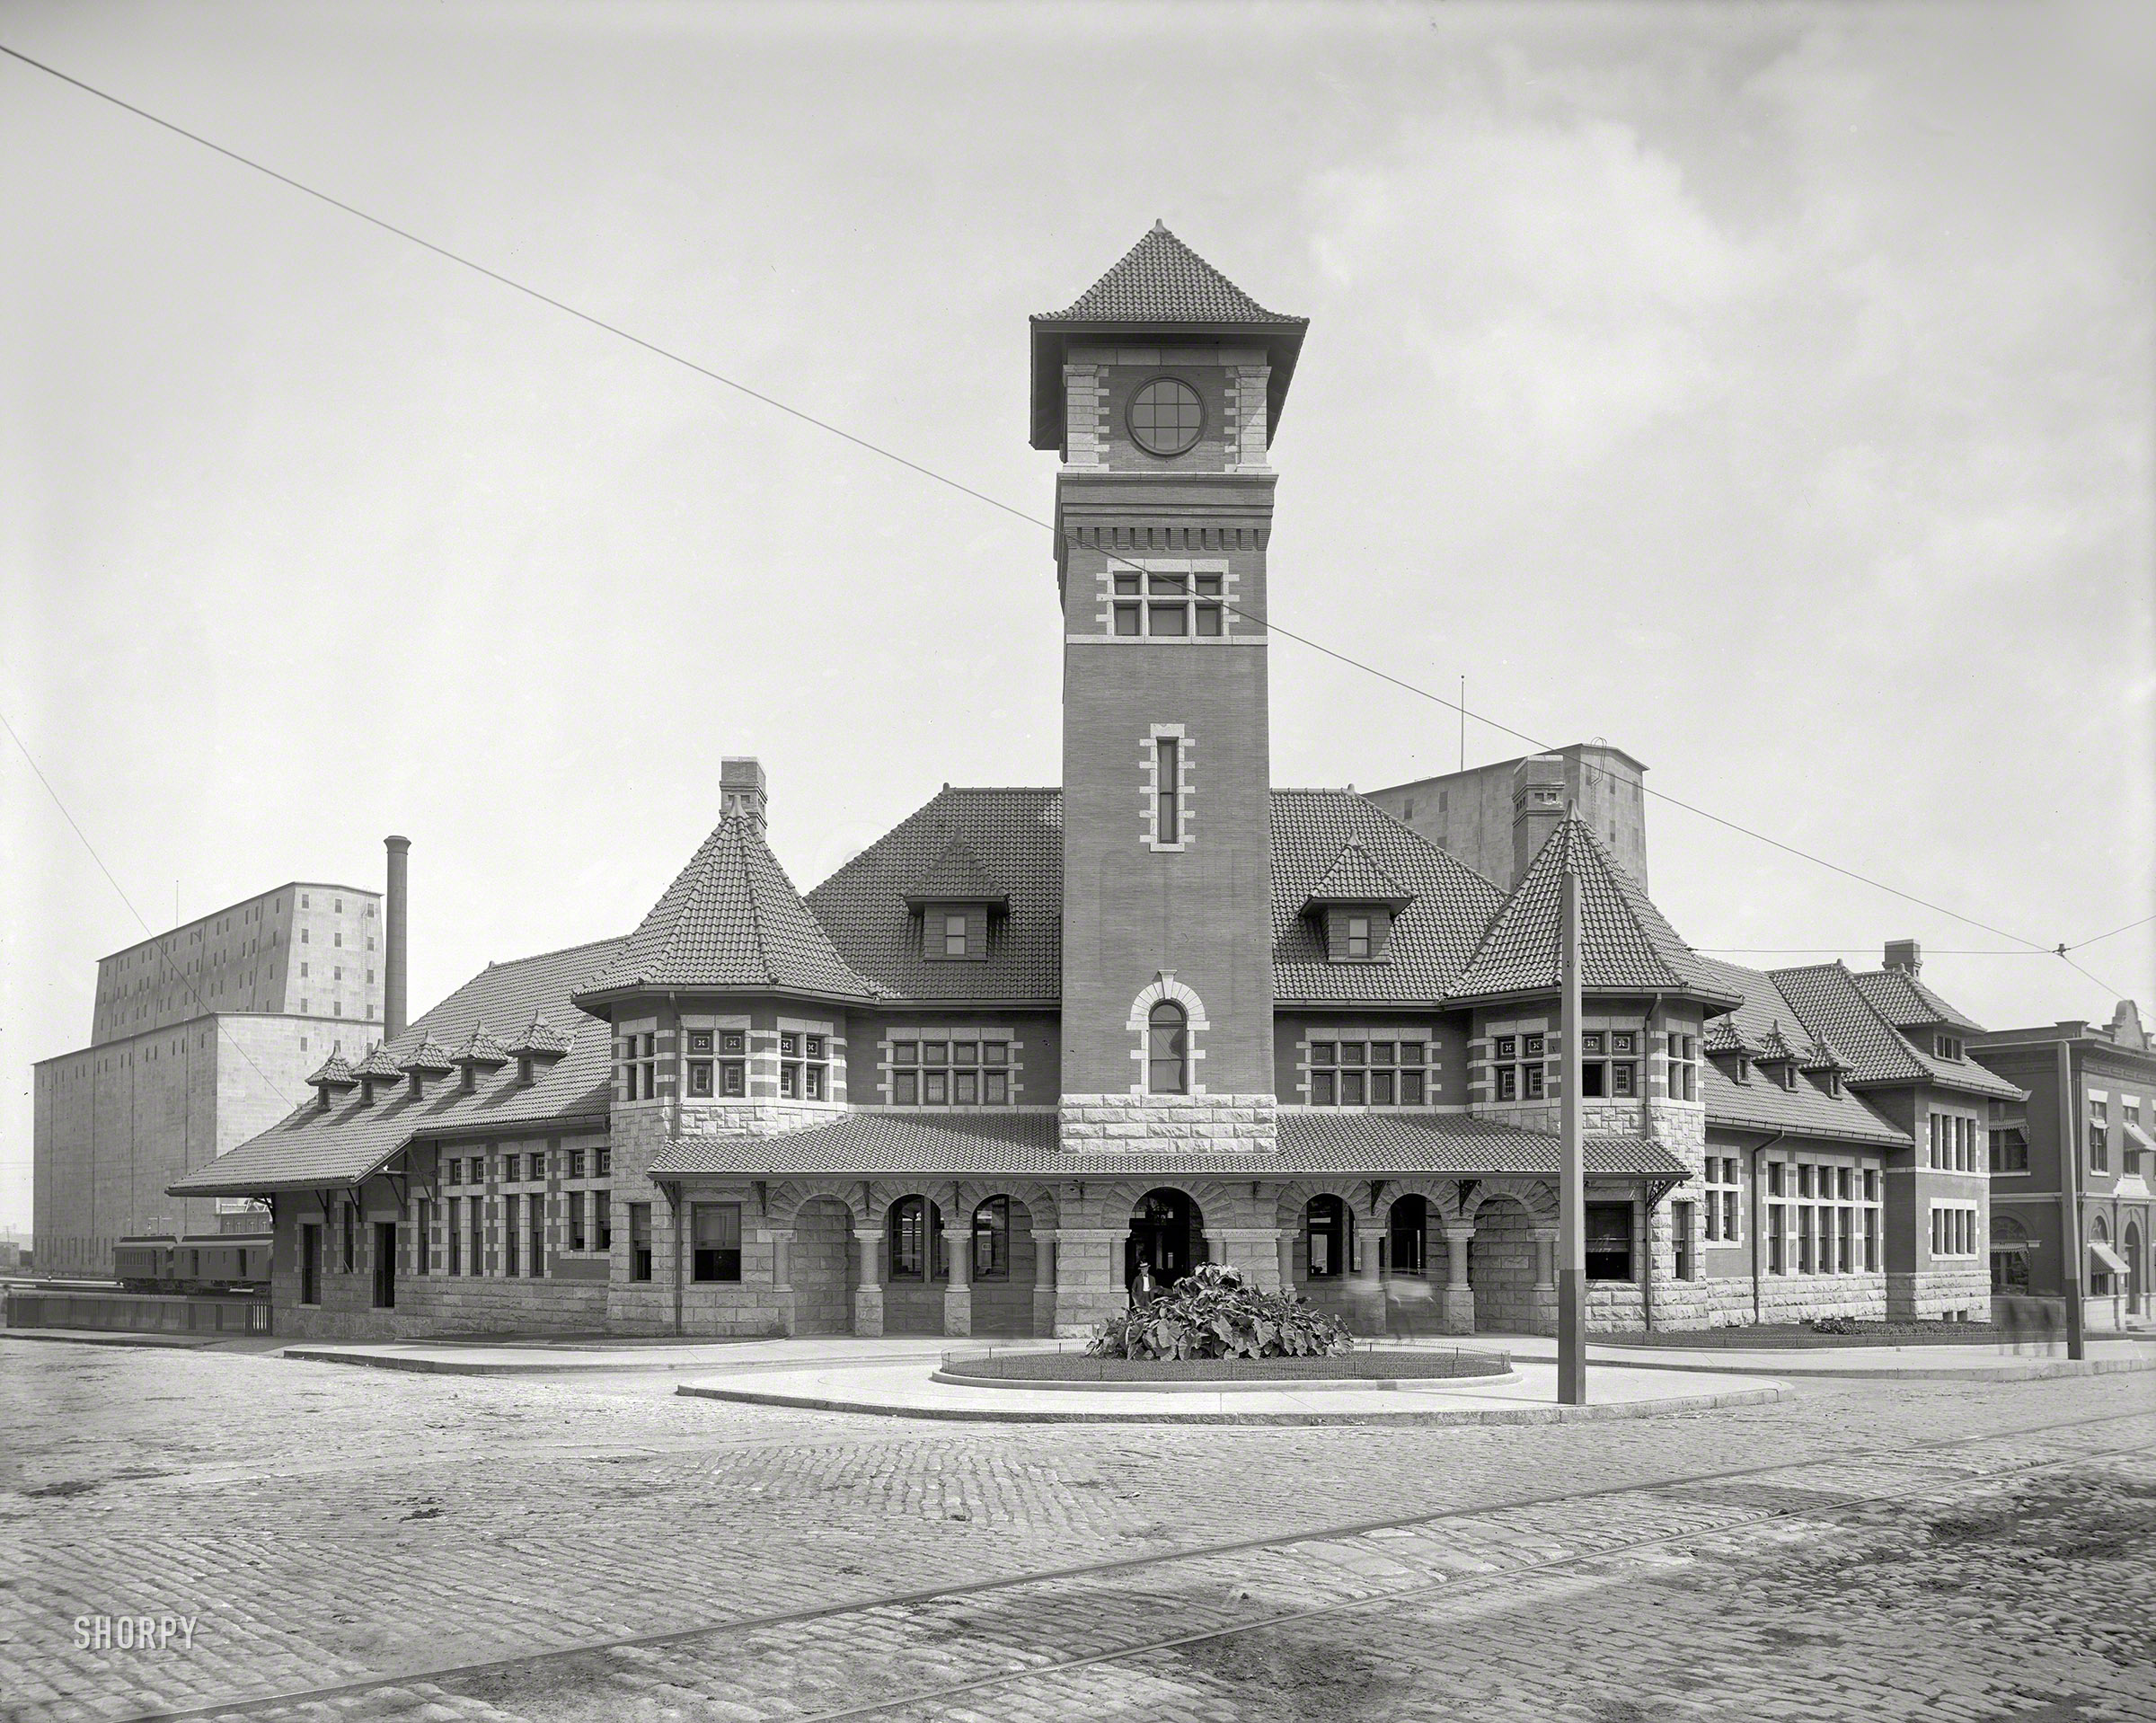 Portland, Maine, circa 1905. "Grand Trunk Station, India Street." 8x10 inch dry plate glass negative, Detroit Publishing Company. View full size.